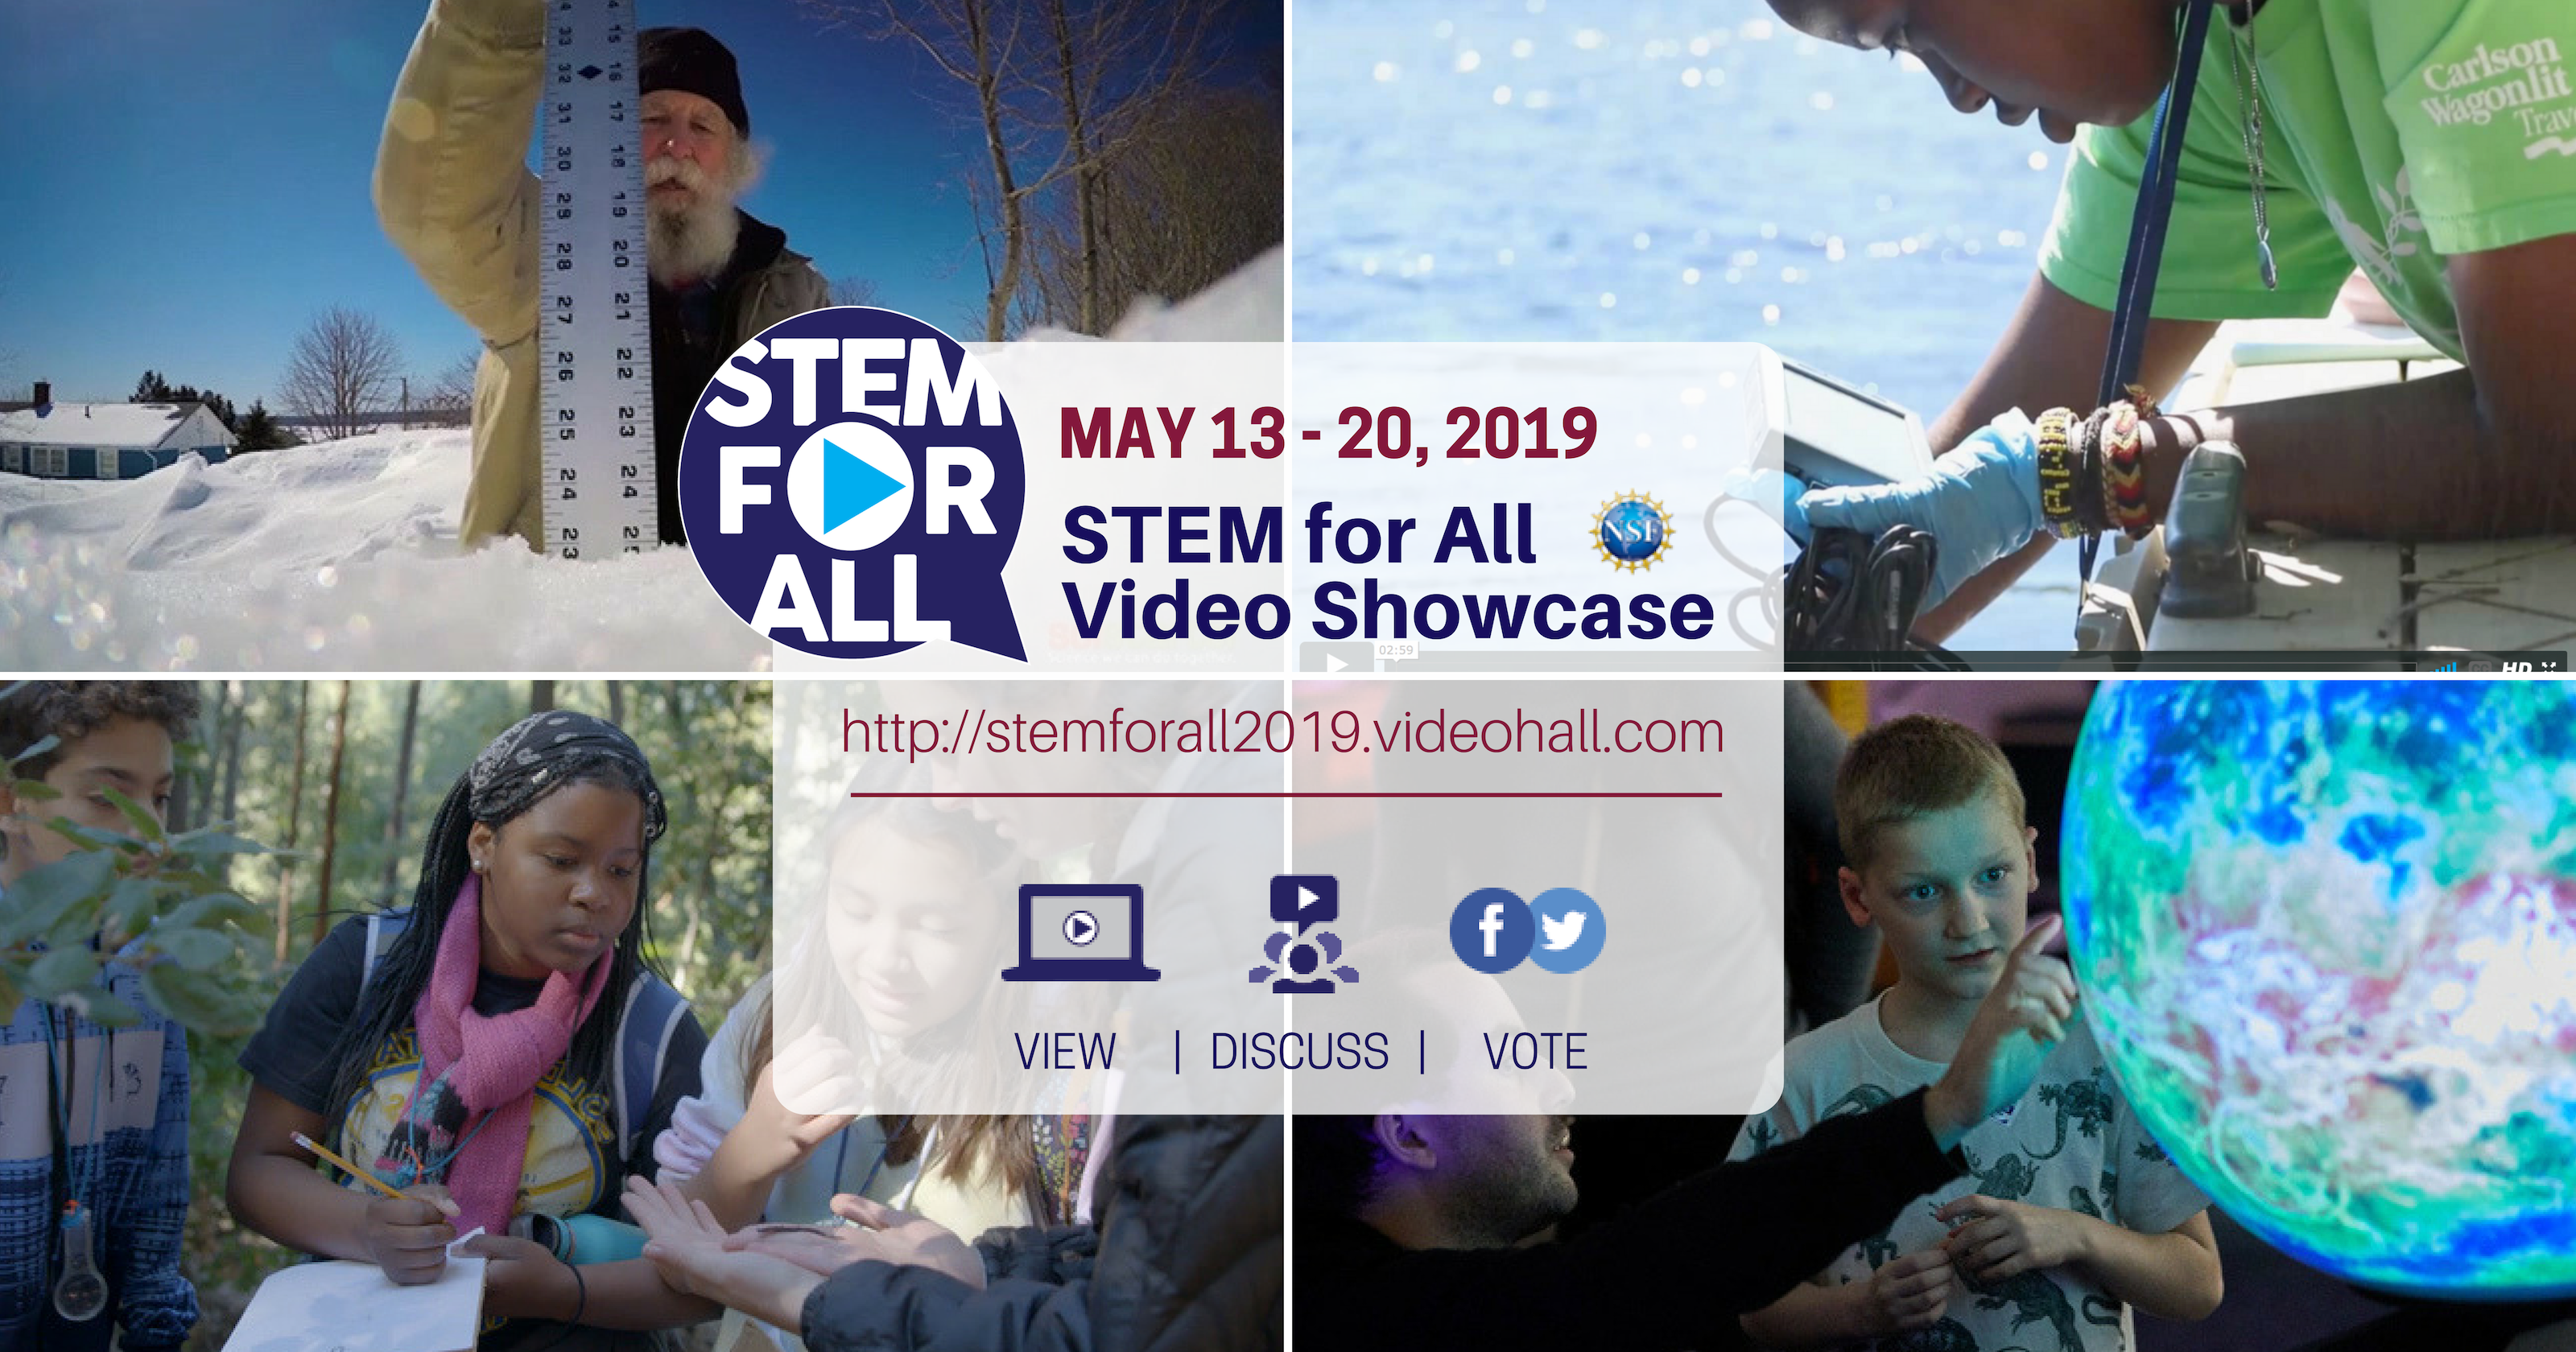 Registration opens January 15th to be a presenter in the 2019 STEM for ALL Video Showcase